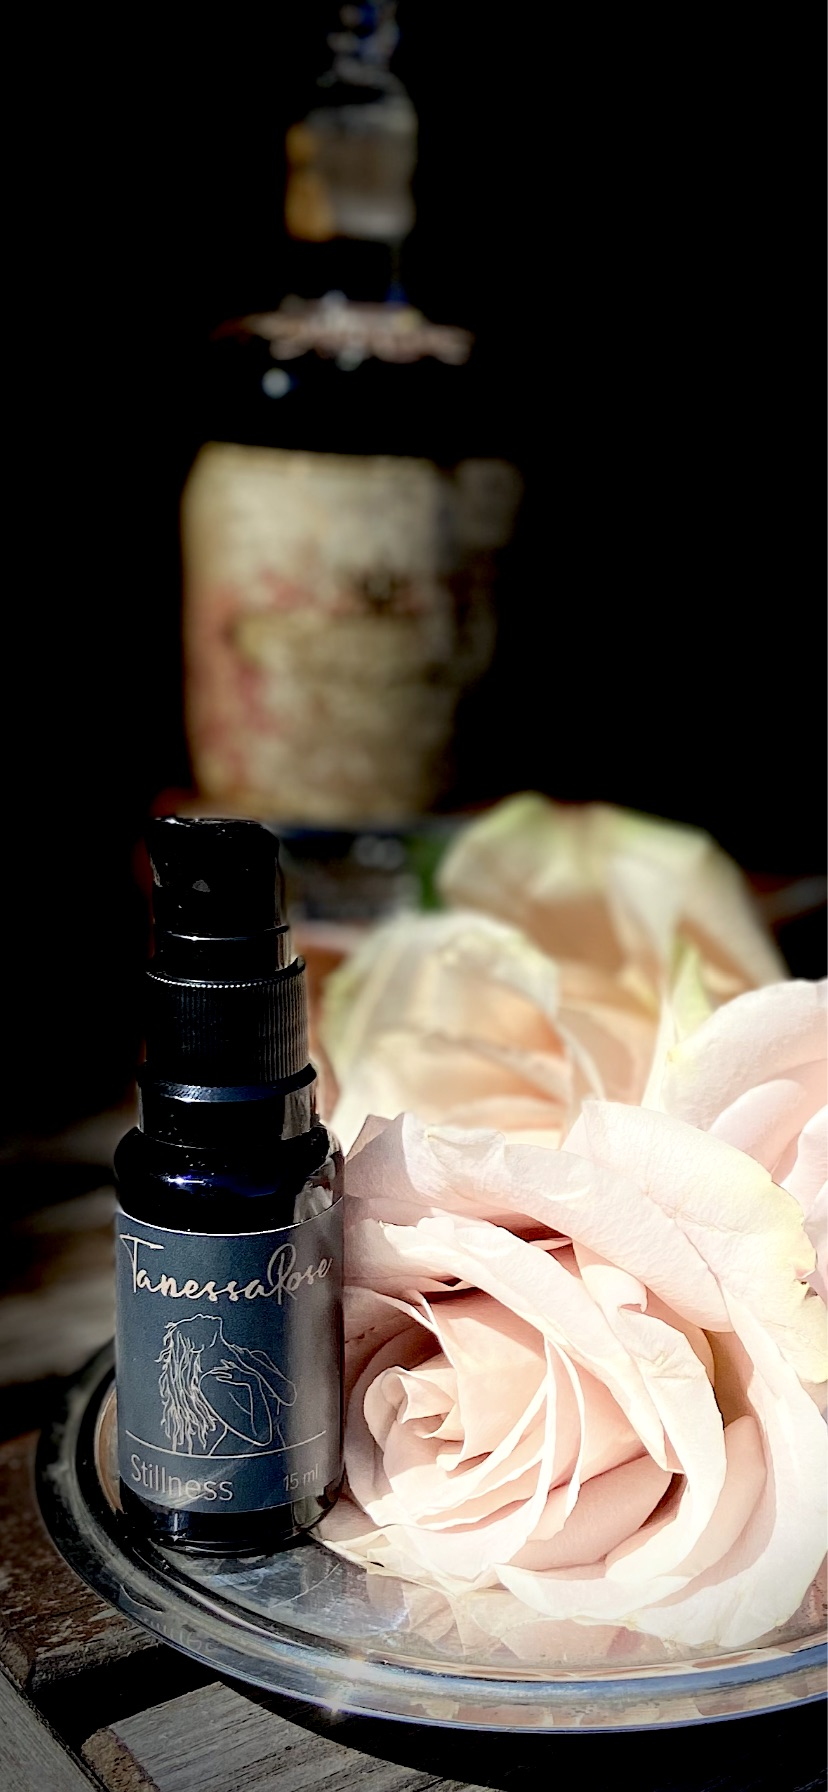 StillNESS oil remedy was created to invoke calmness and centeredness, infused with frankincense, cedar wood, clary sage, palo santo, and blended into moringa, prickly pear, and sweet almond oil. 